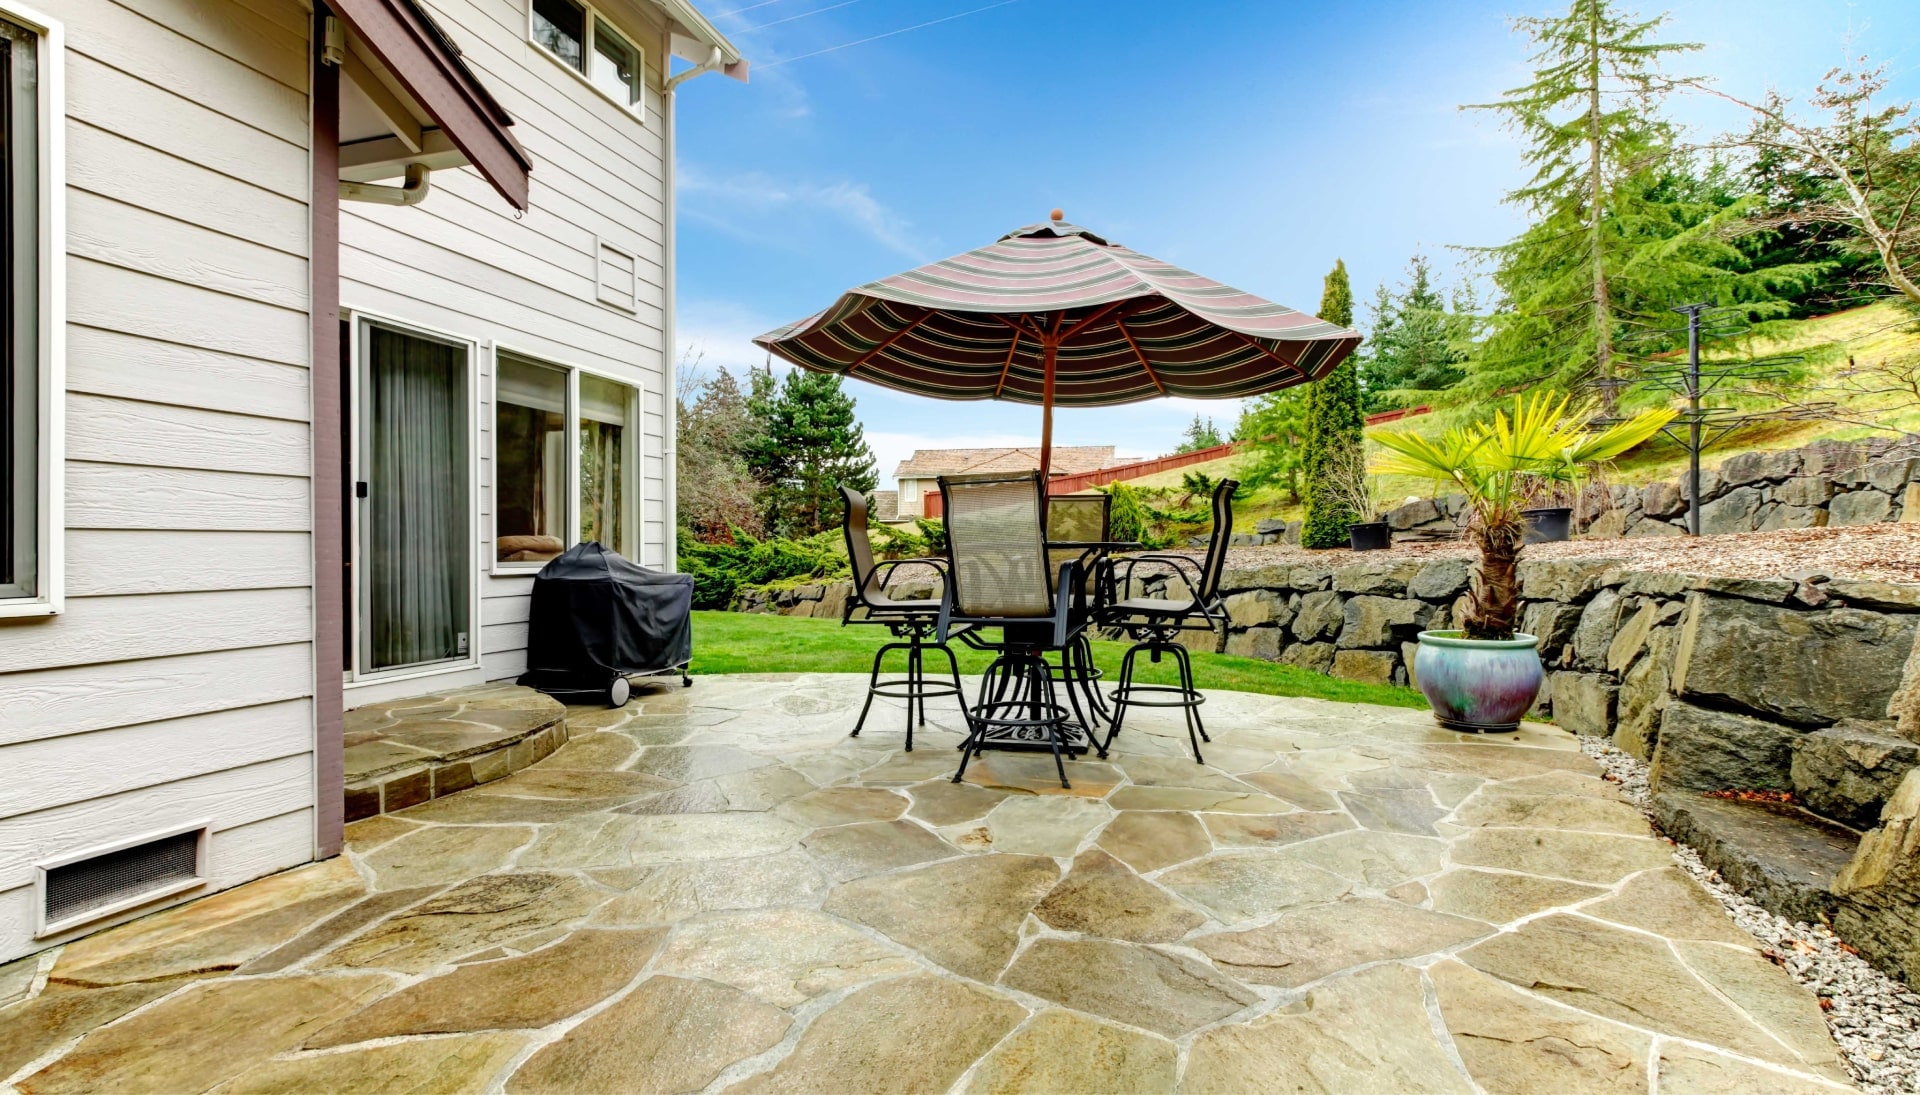 Beautifully Textured and Patterned Concrete Patios in Walnut Creek, WA